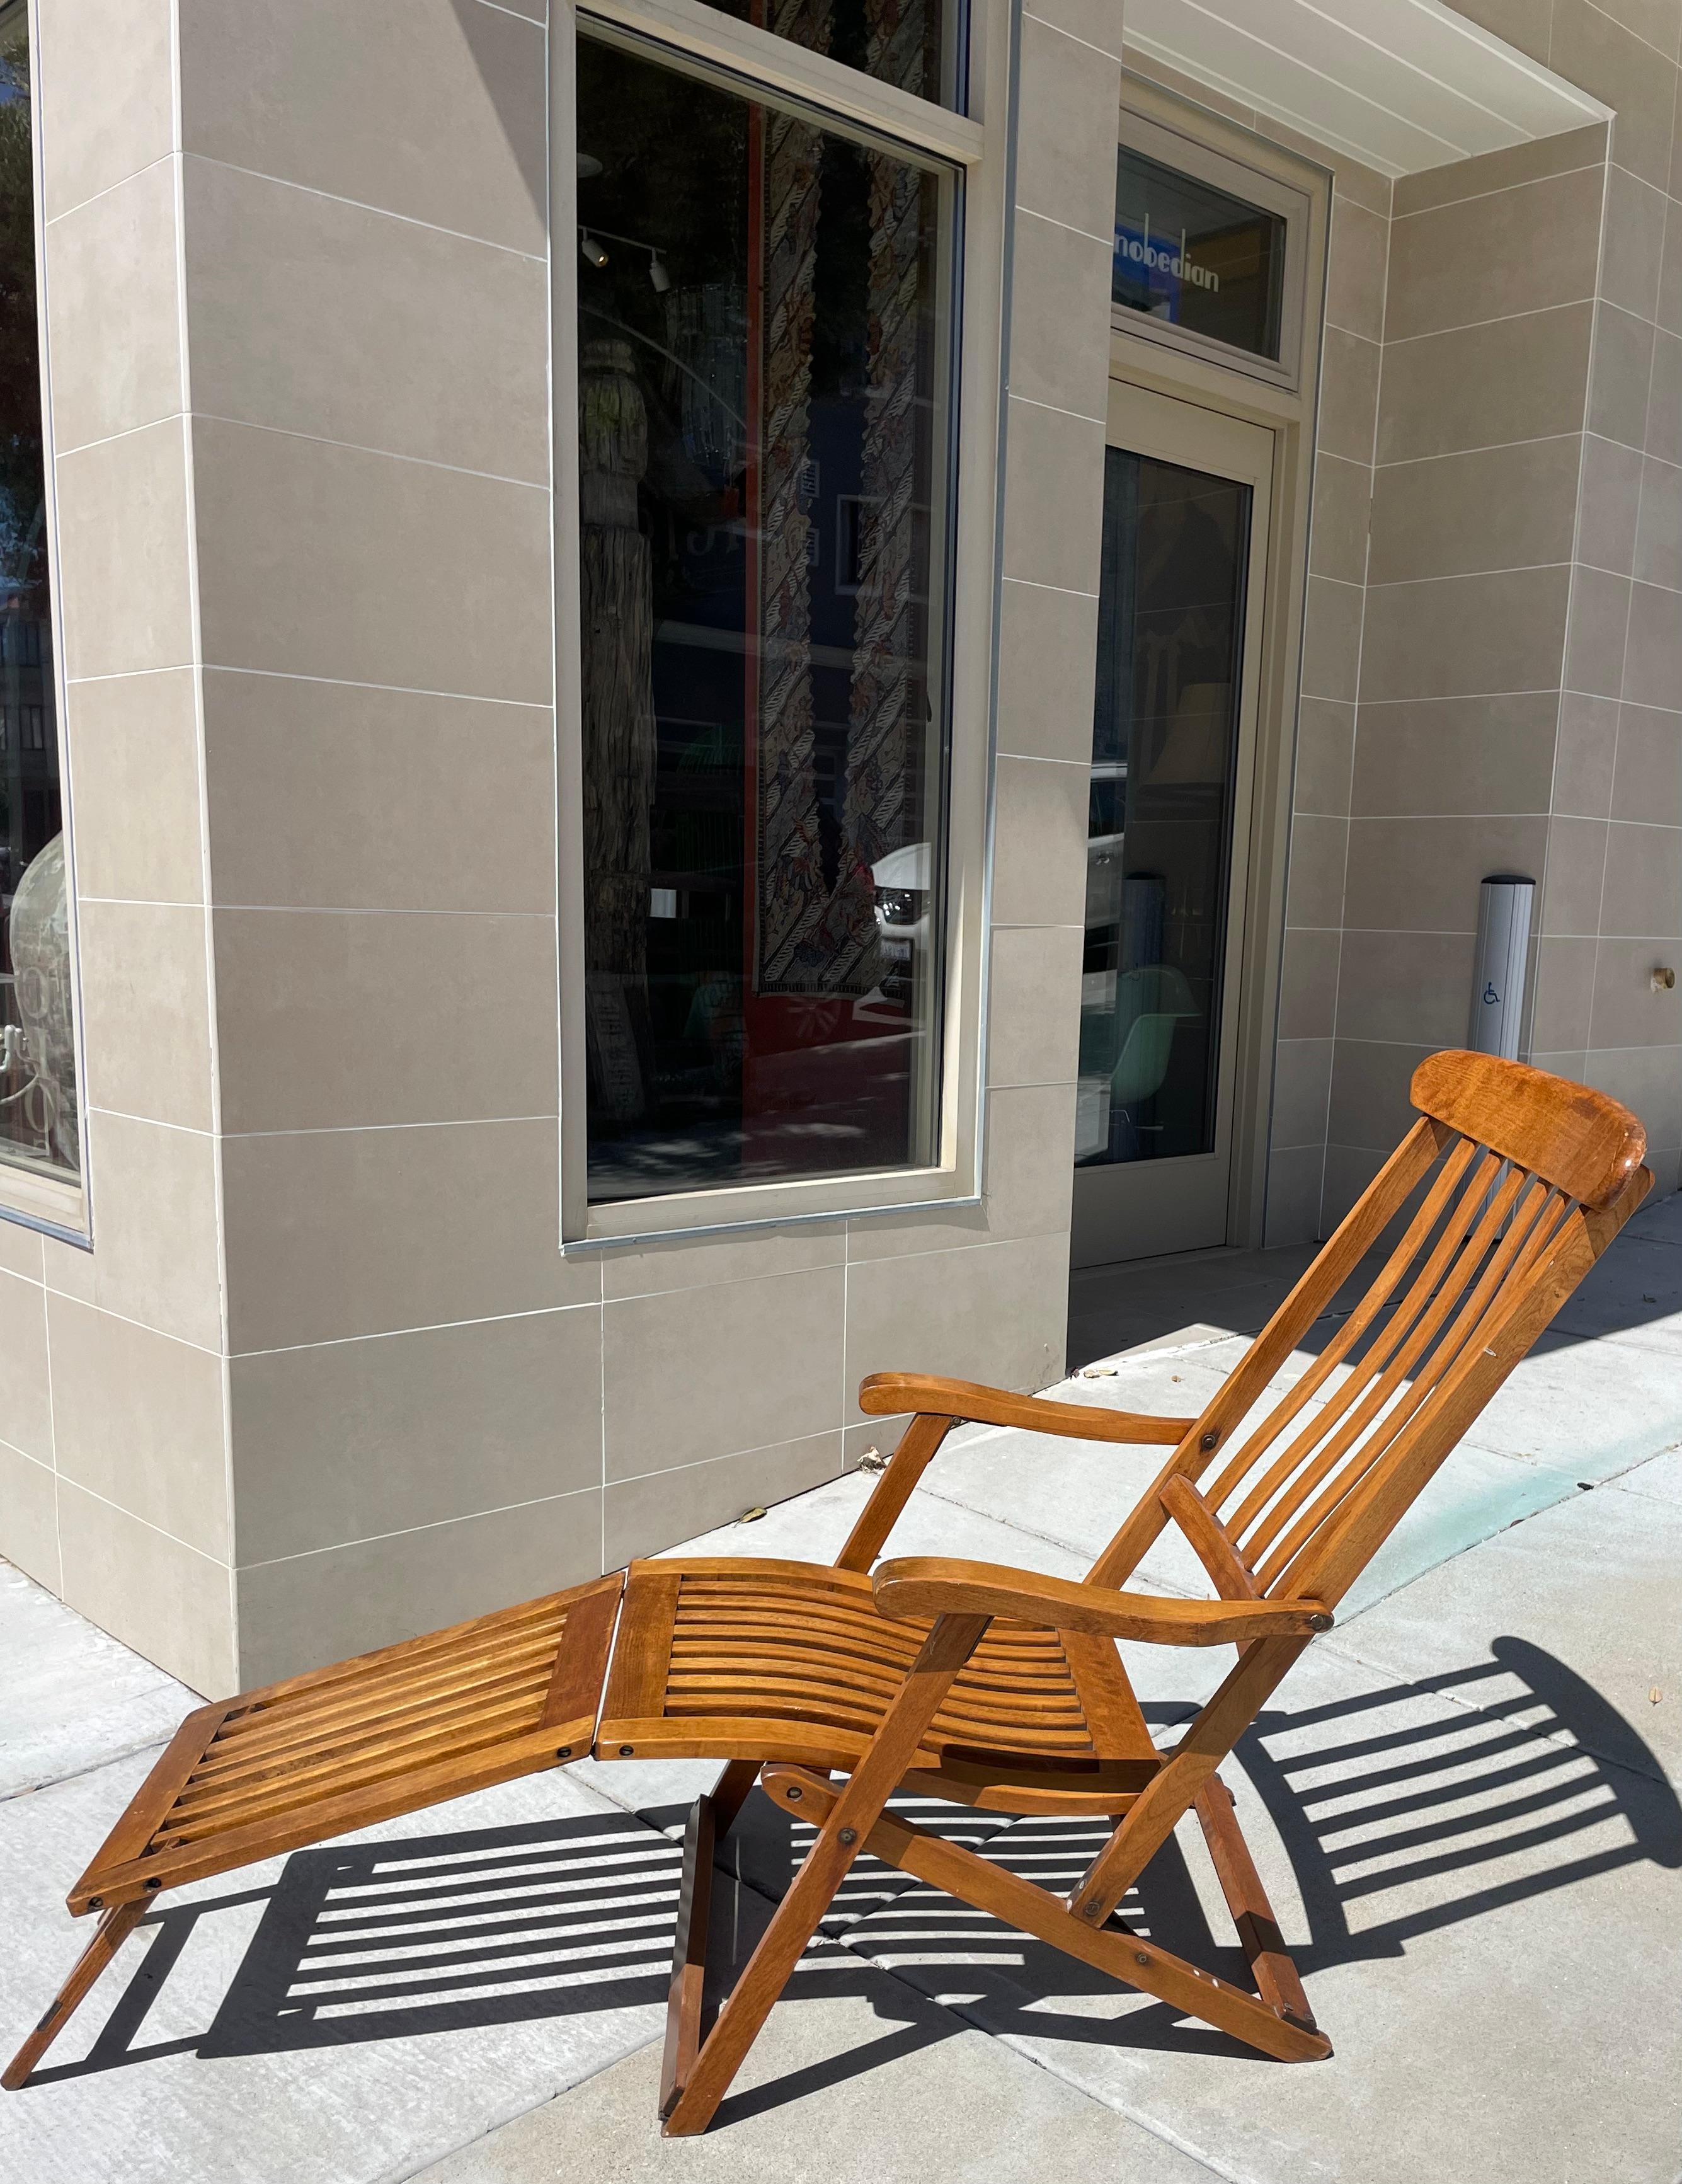 I also have a matching pair of side chairs that could complement this fantastic multi position lounge chair. Adorn it with the cushion of your choice and take in the breeze from your quiet place in the world. 